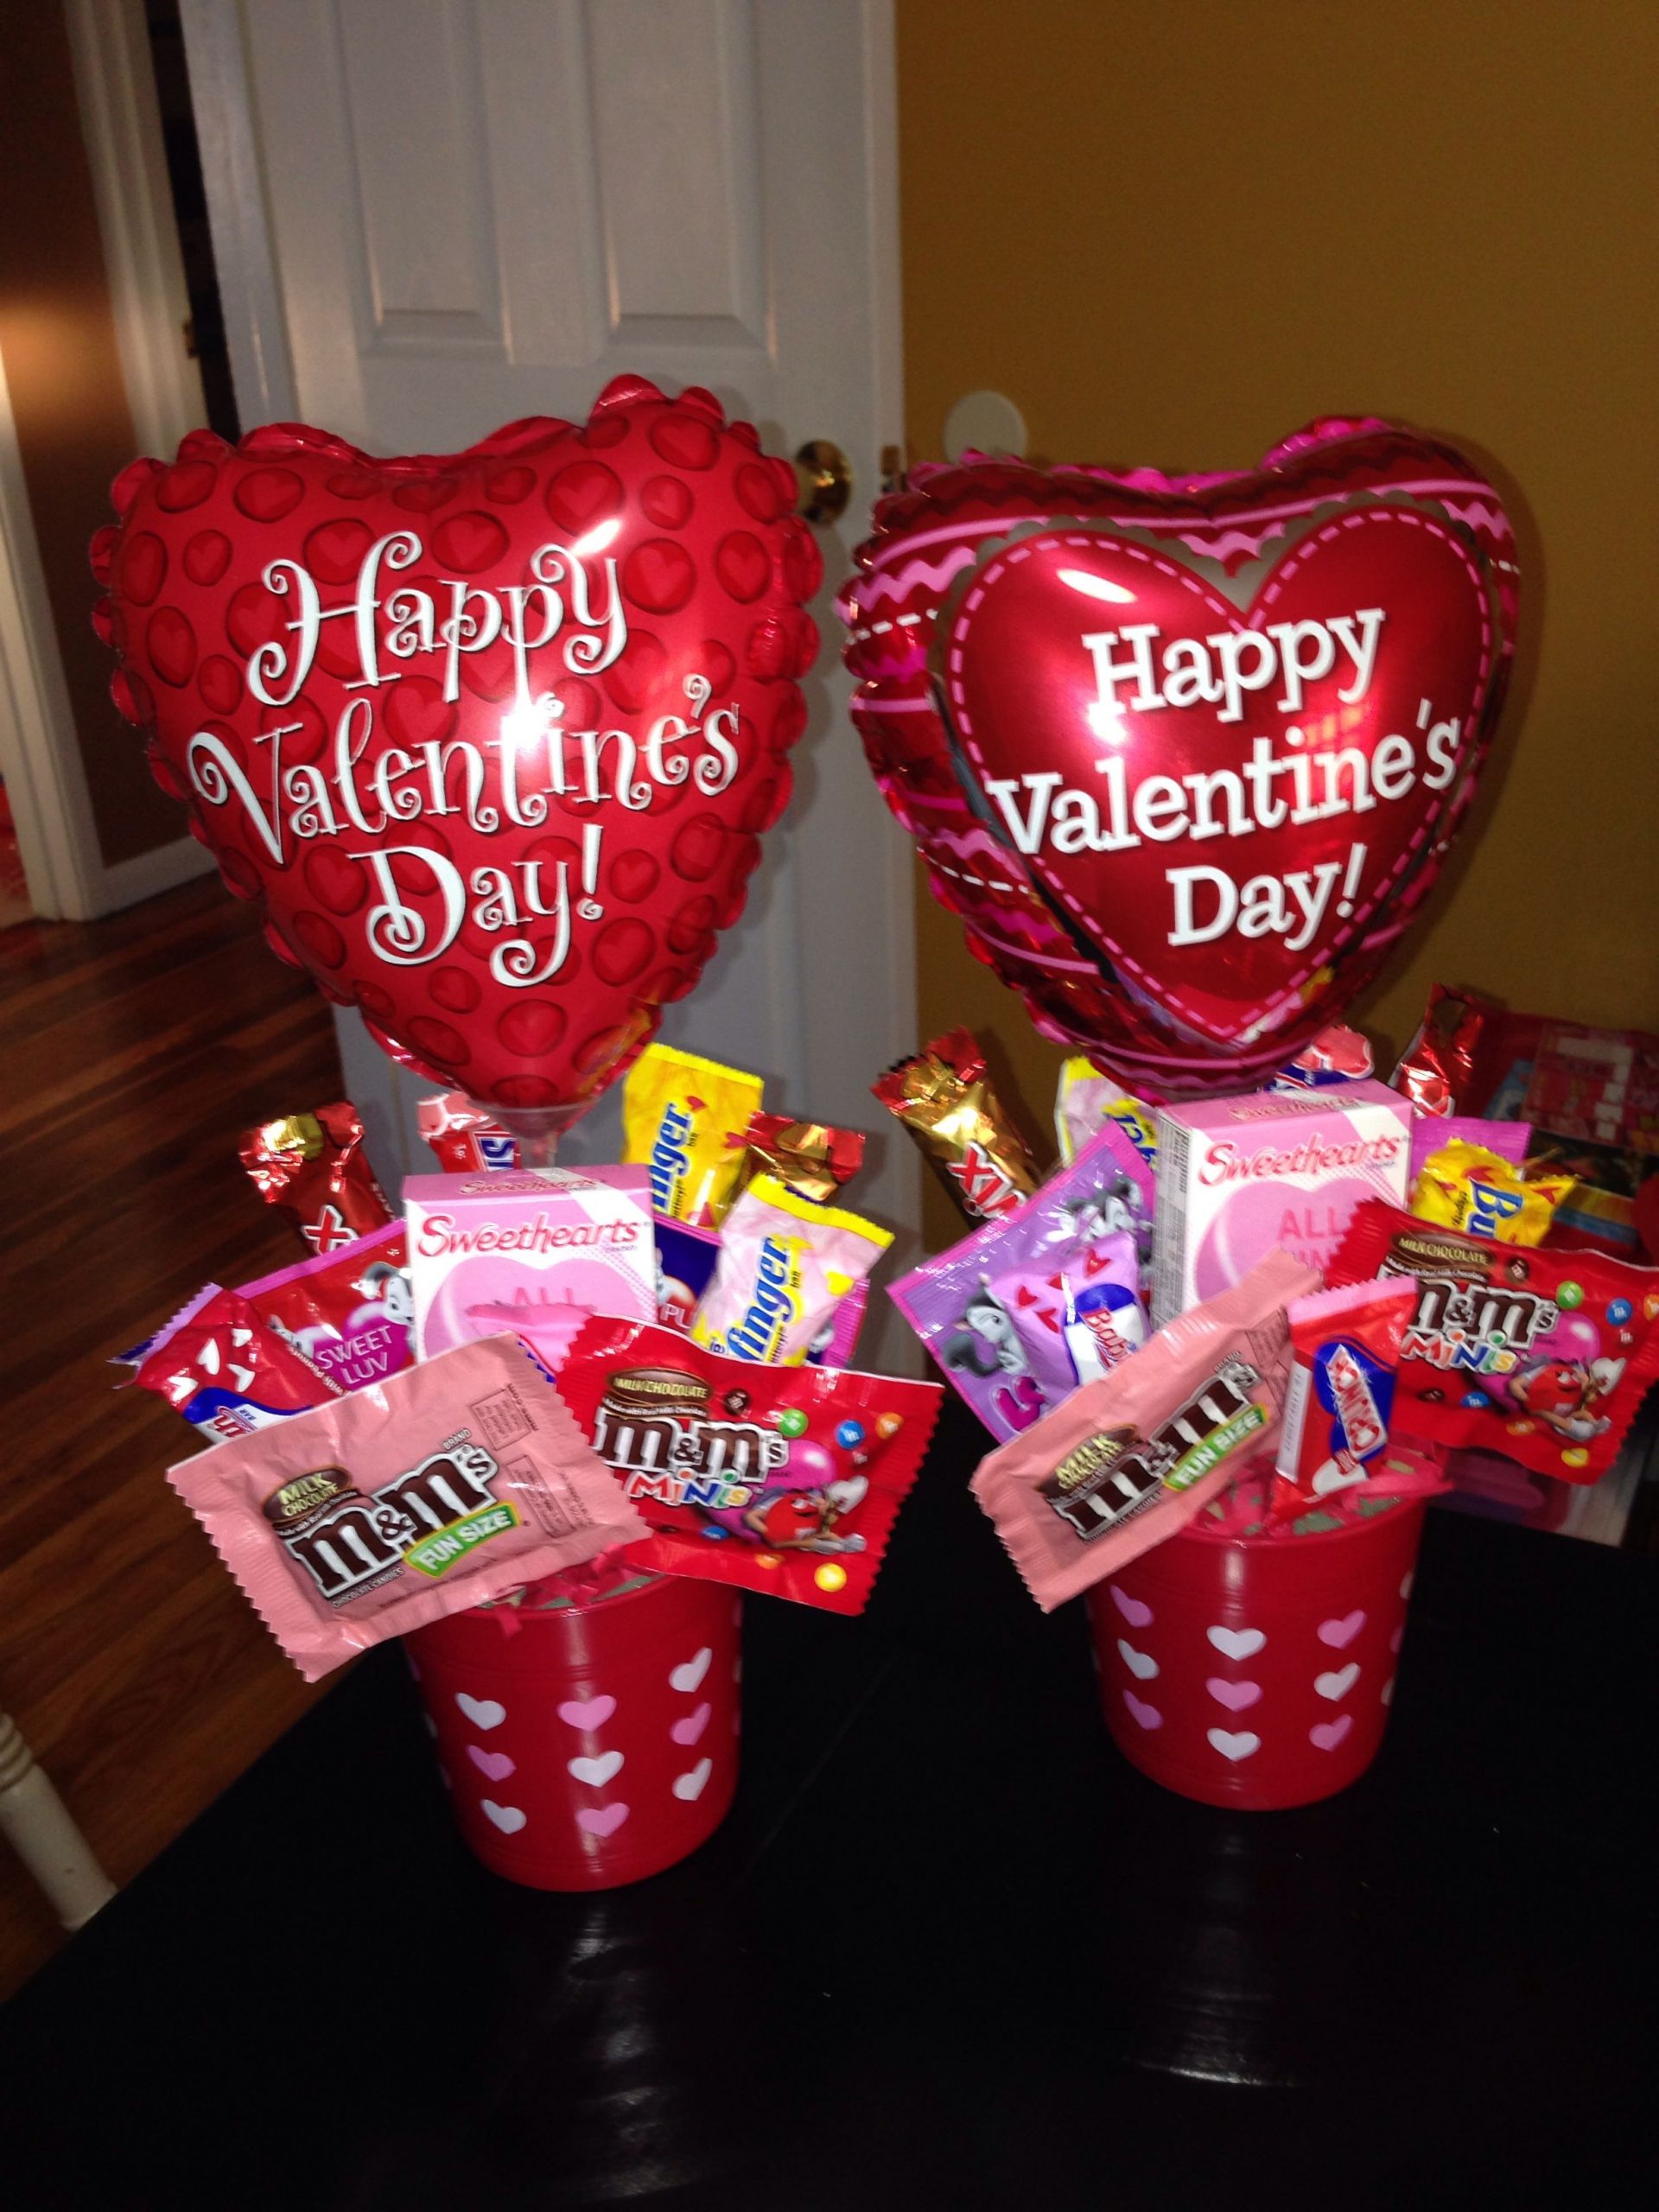 Valentine Candy Gift Ideas
 Small valentines bouquets